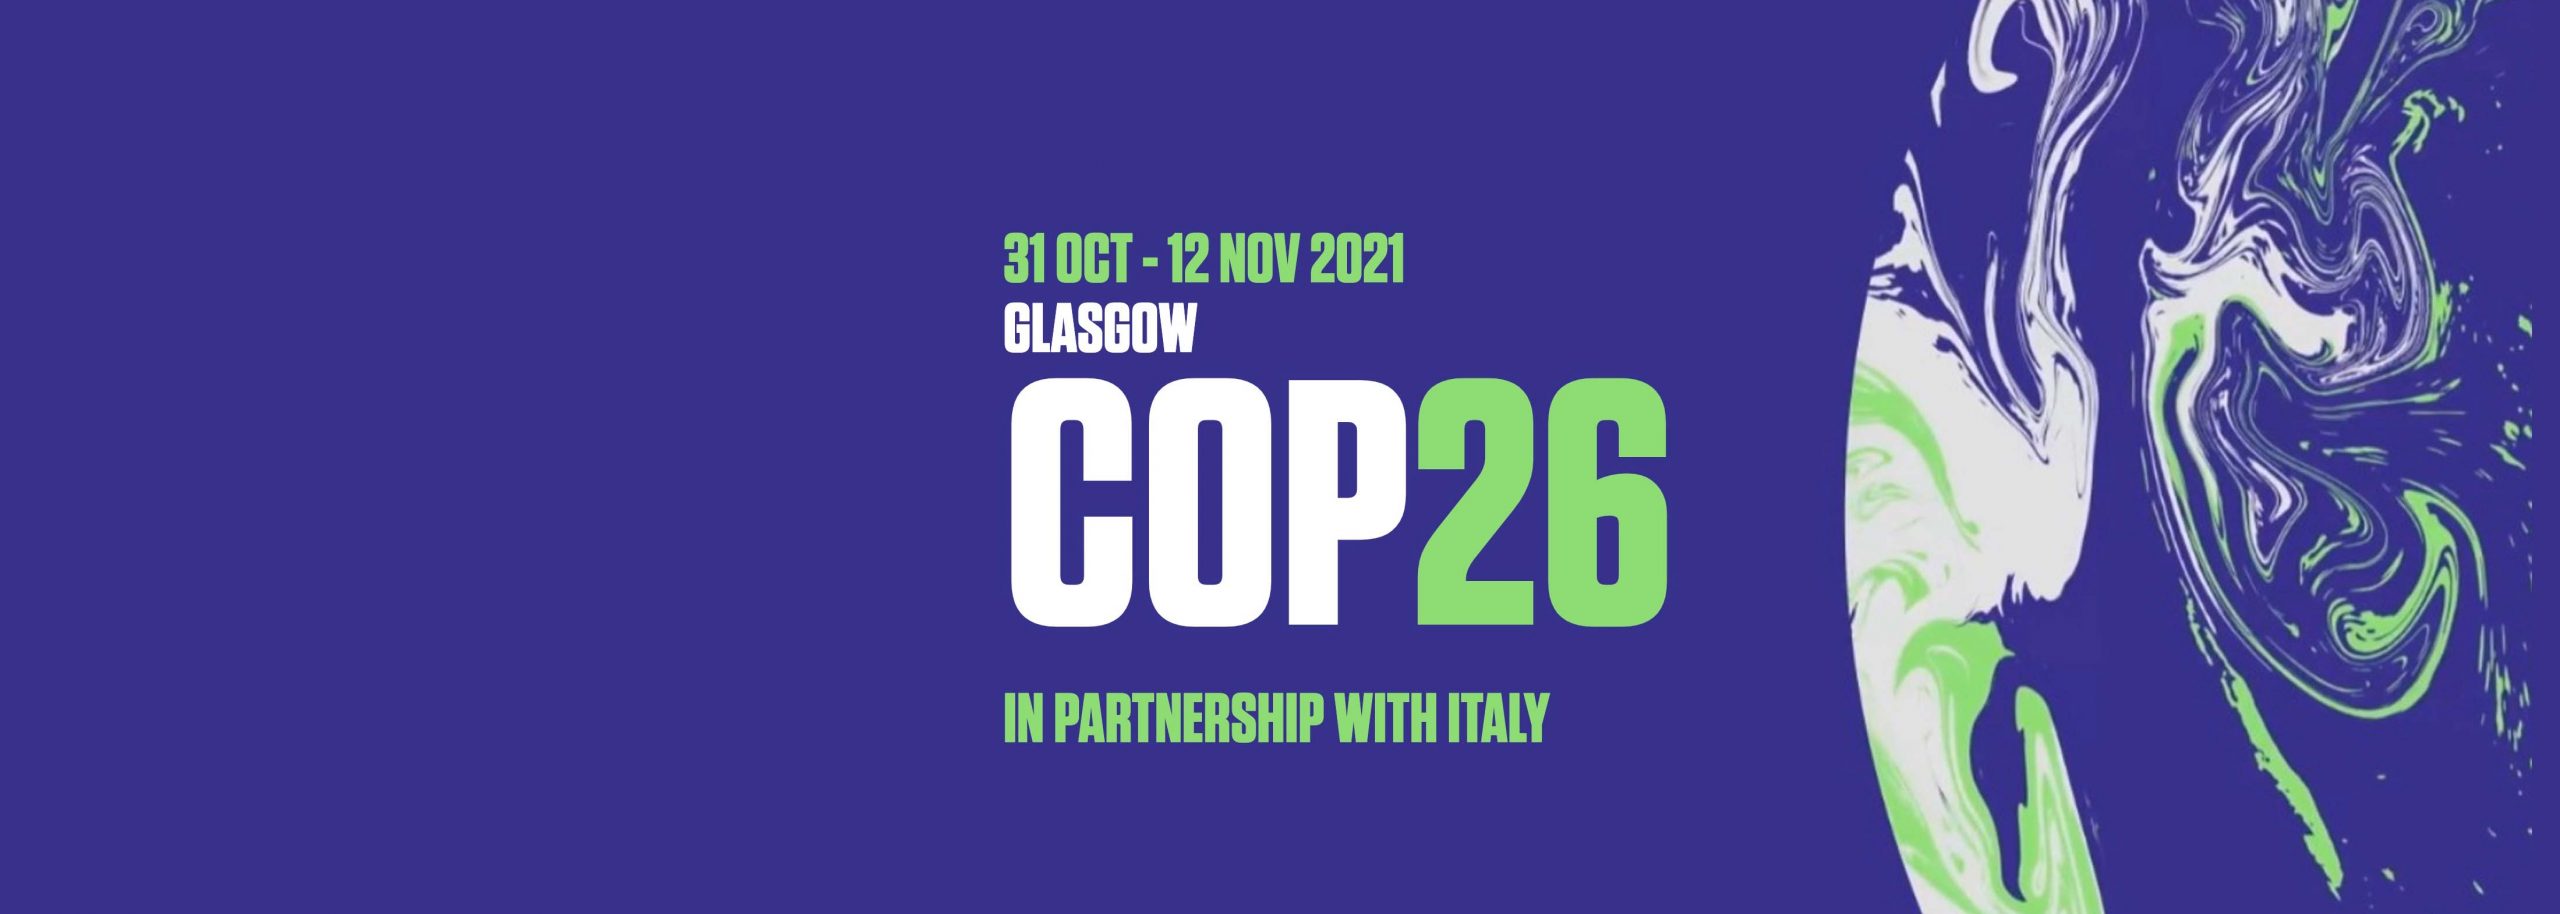 Hivos at COP26: putting justice at the core of global climate action